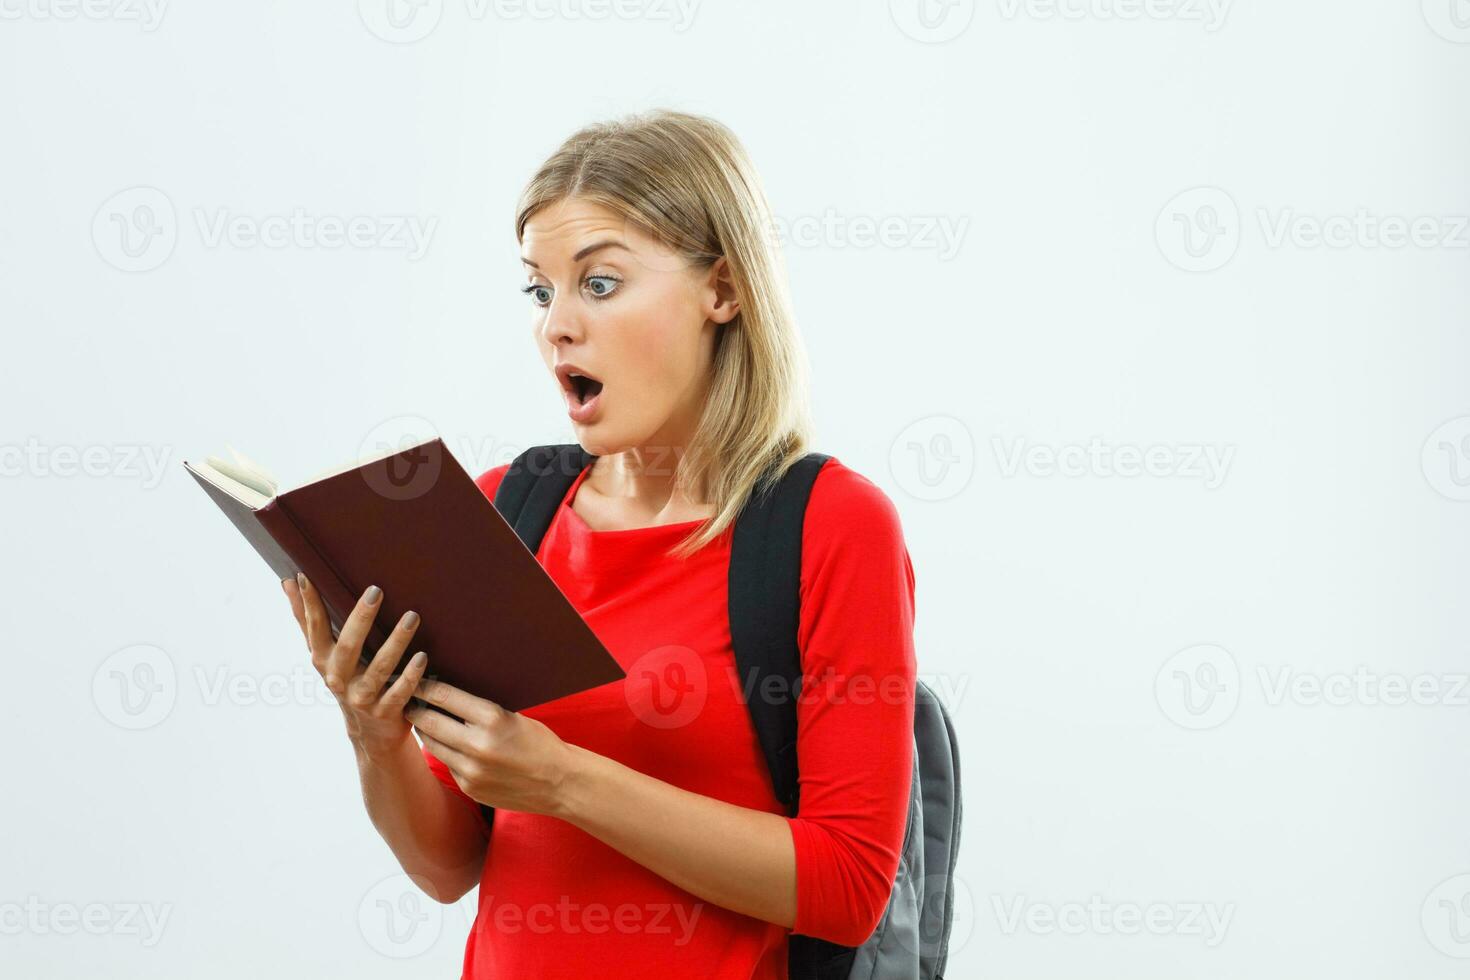 Surprised student reading book photo